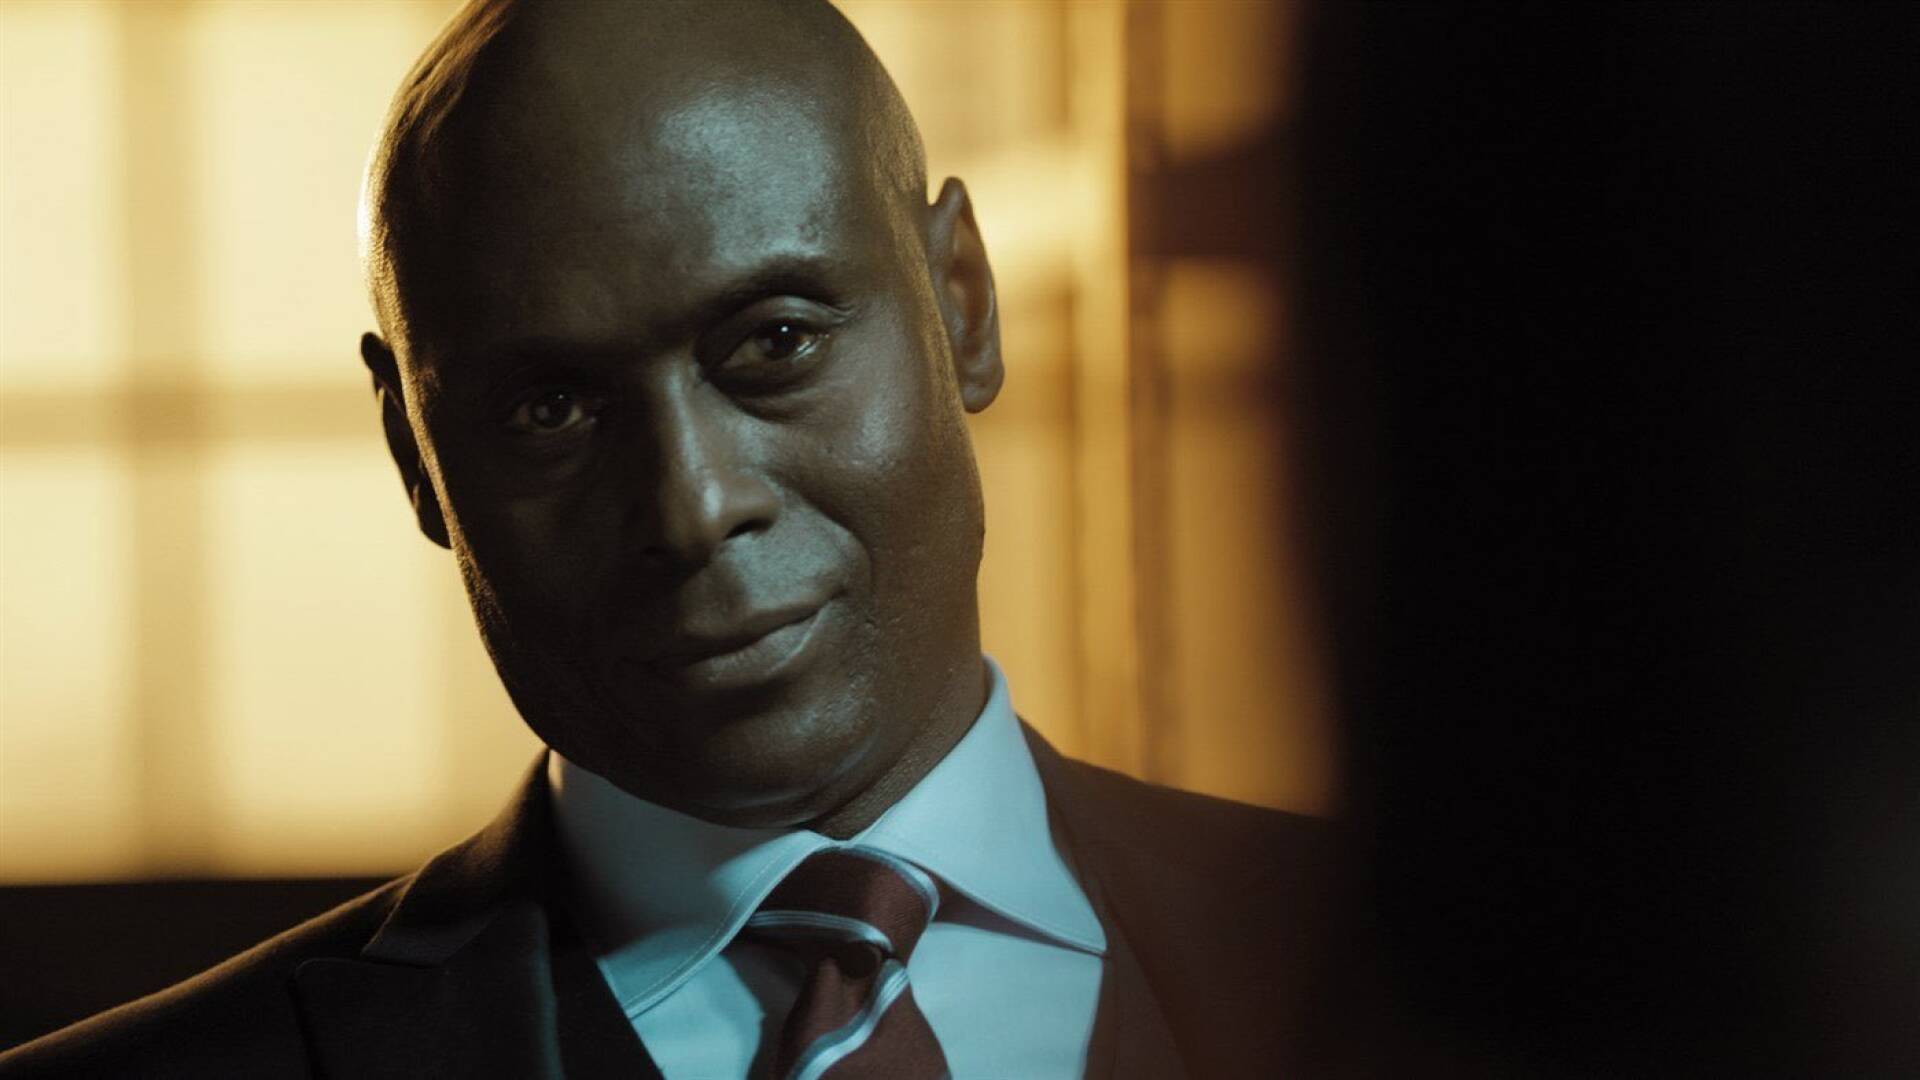 Lance Reddick will be returning to video games one last time, Bungie confirms